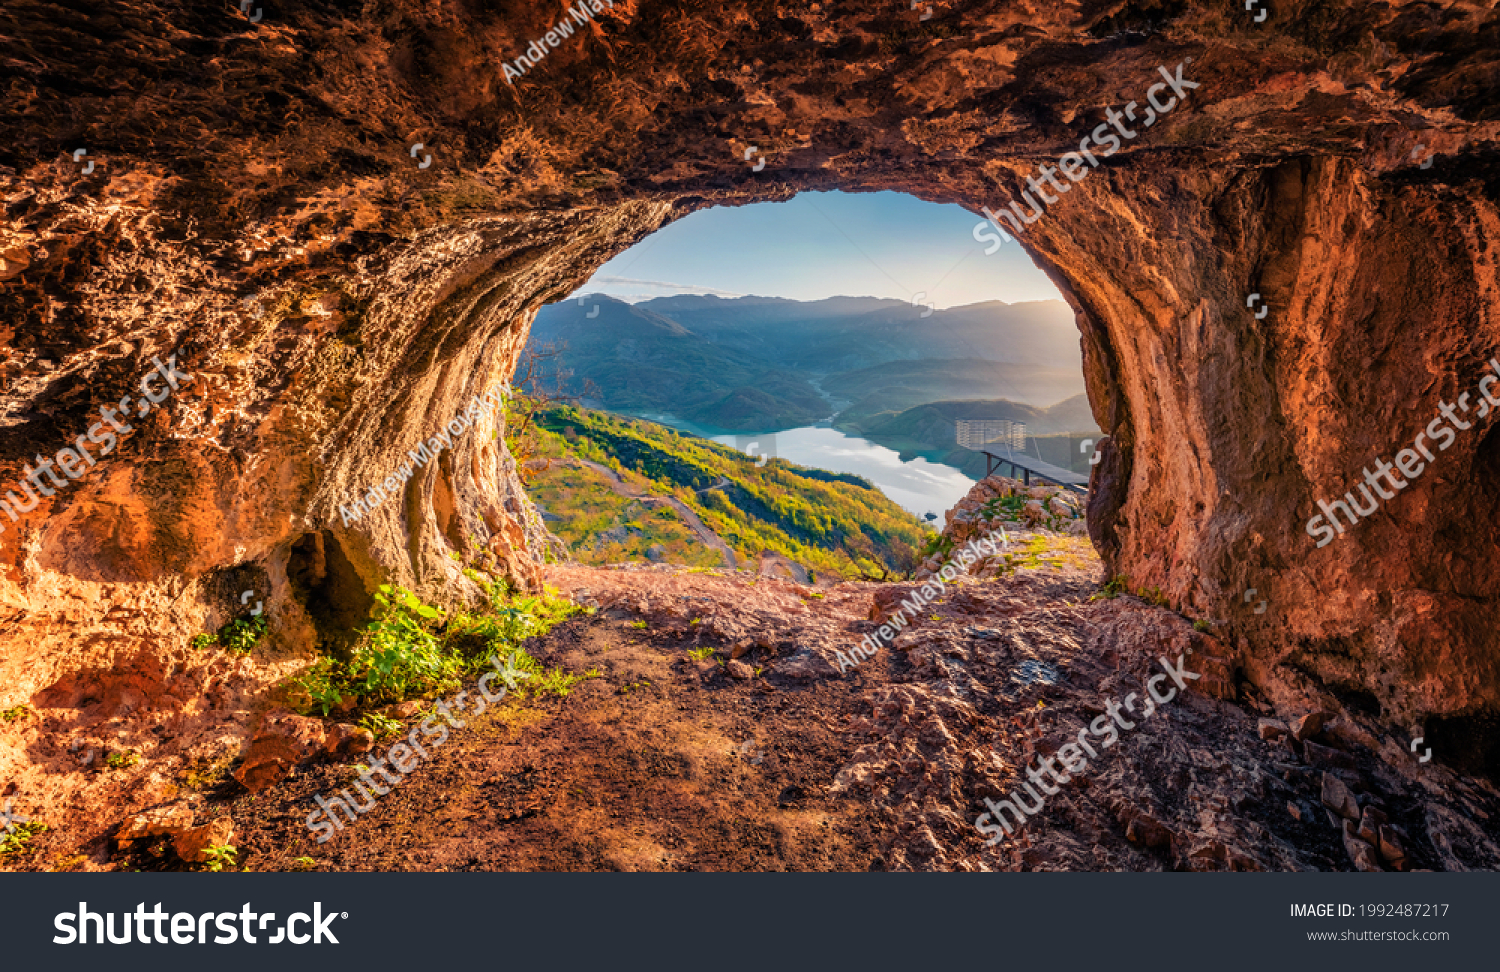 Fantastic view from the cave of Bovilla Lake, near Tirana city located. Superb spring landscape. Unbelievable outdor scene of Albania, Europe. Beauty of nature concept background. #1992487217